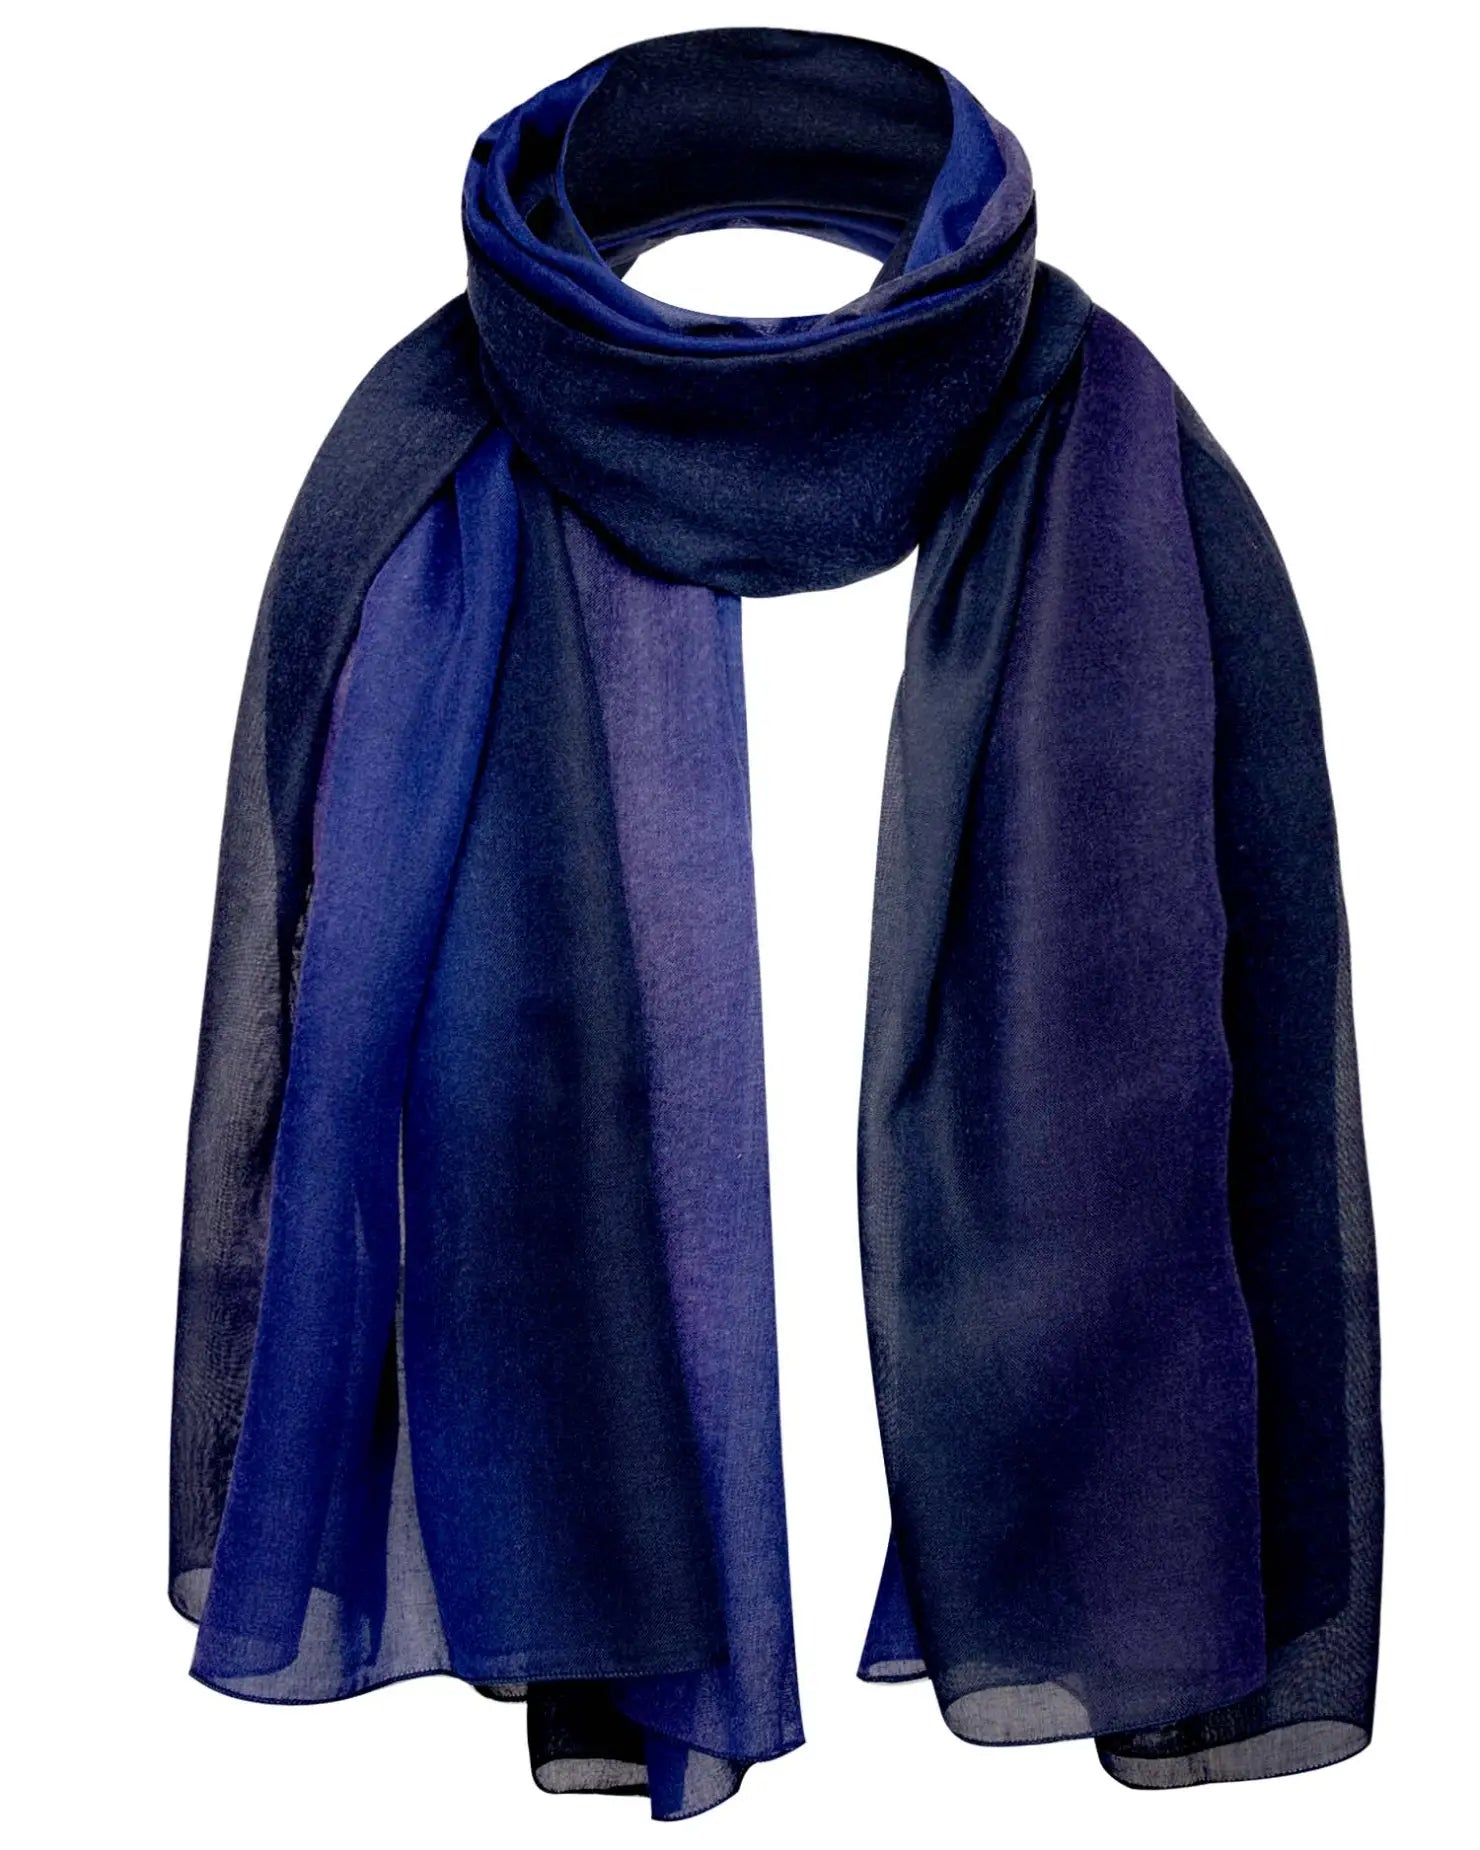 Ombre tie dye blue scarf with black border